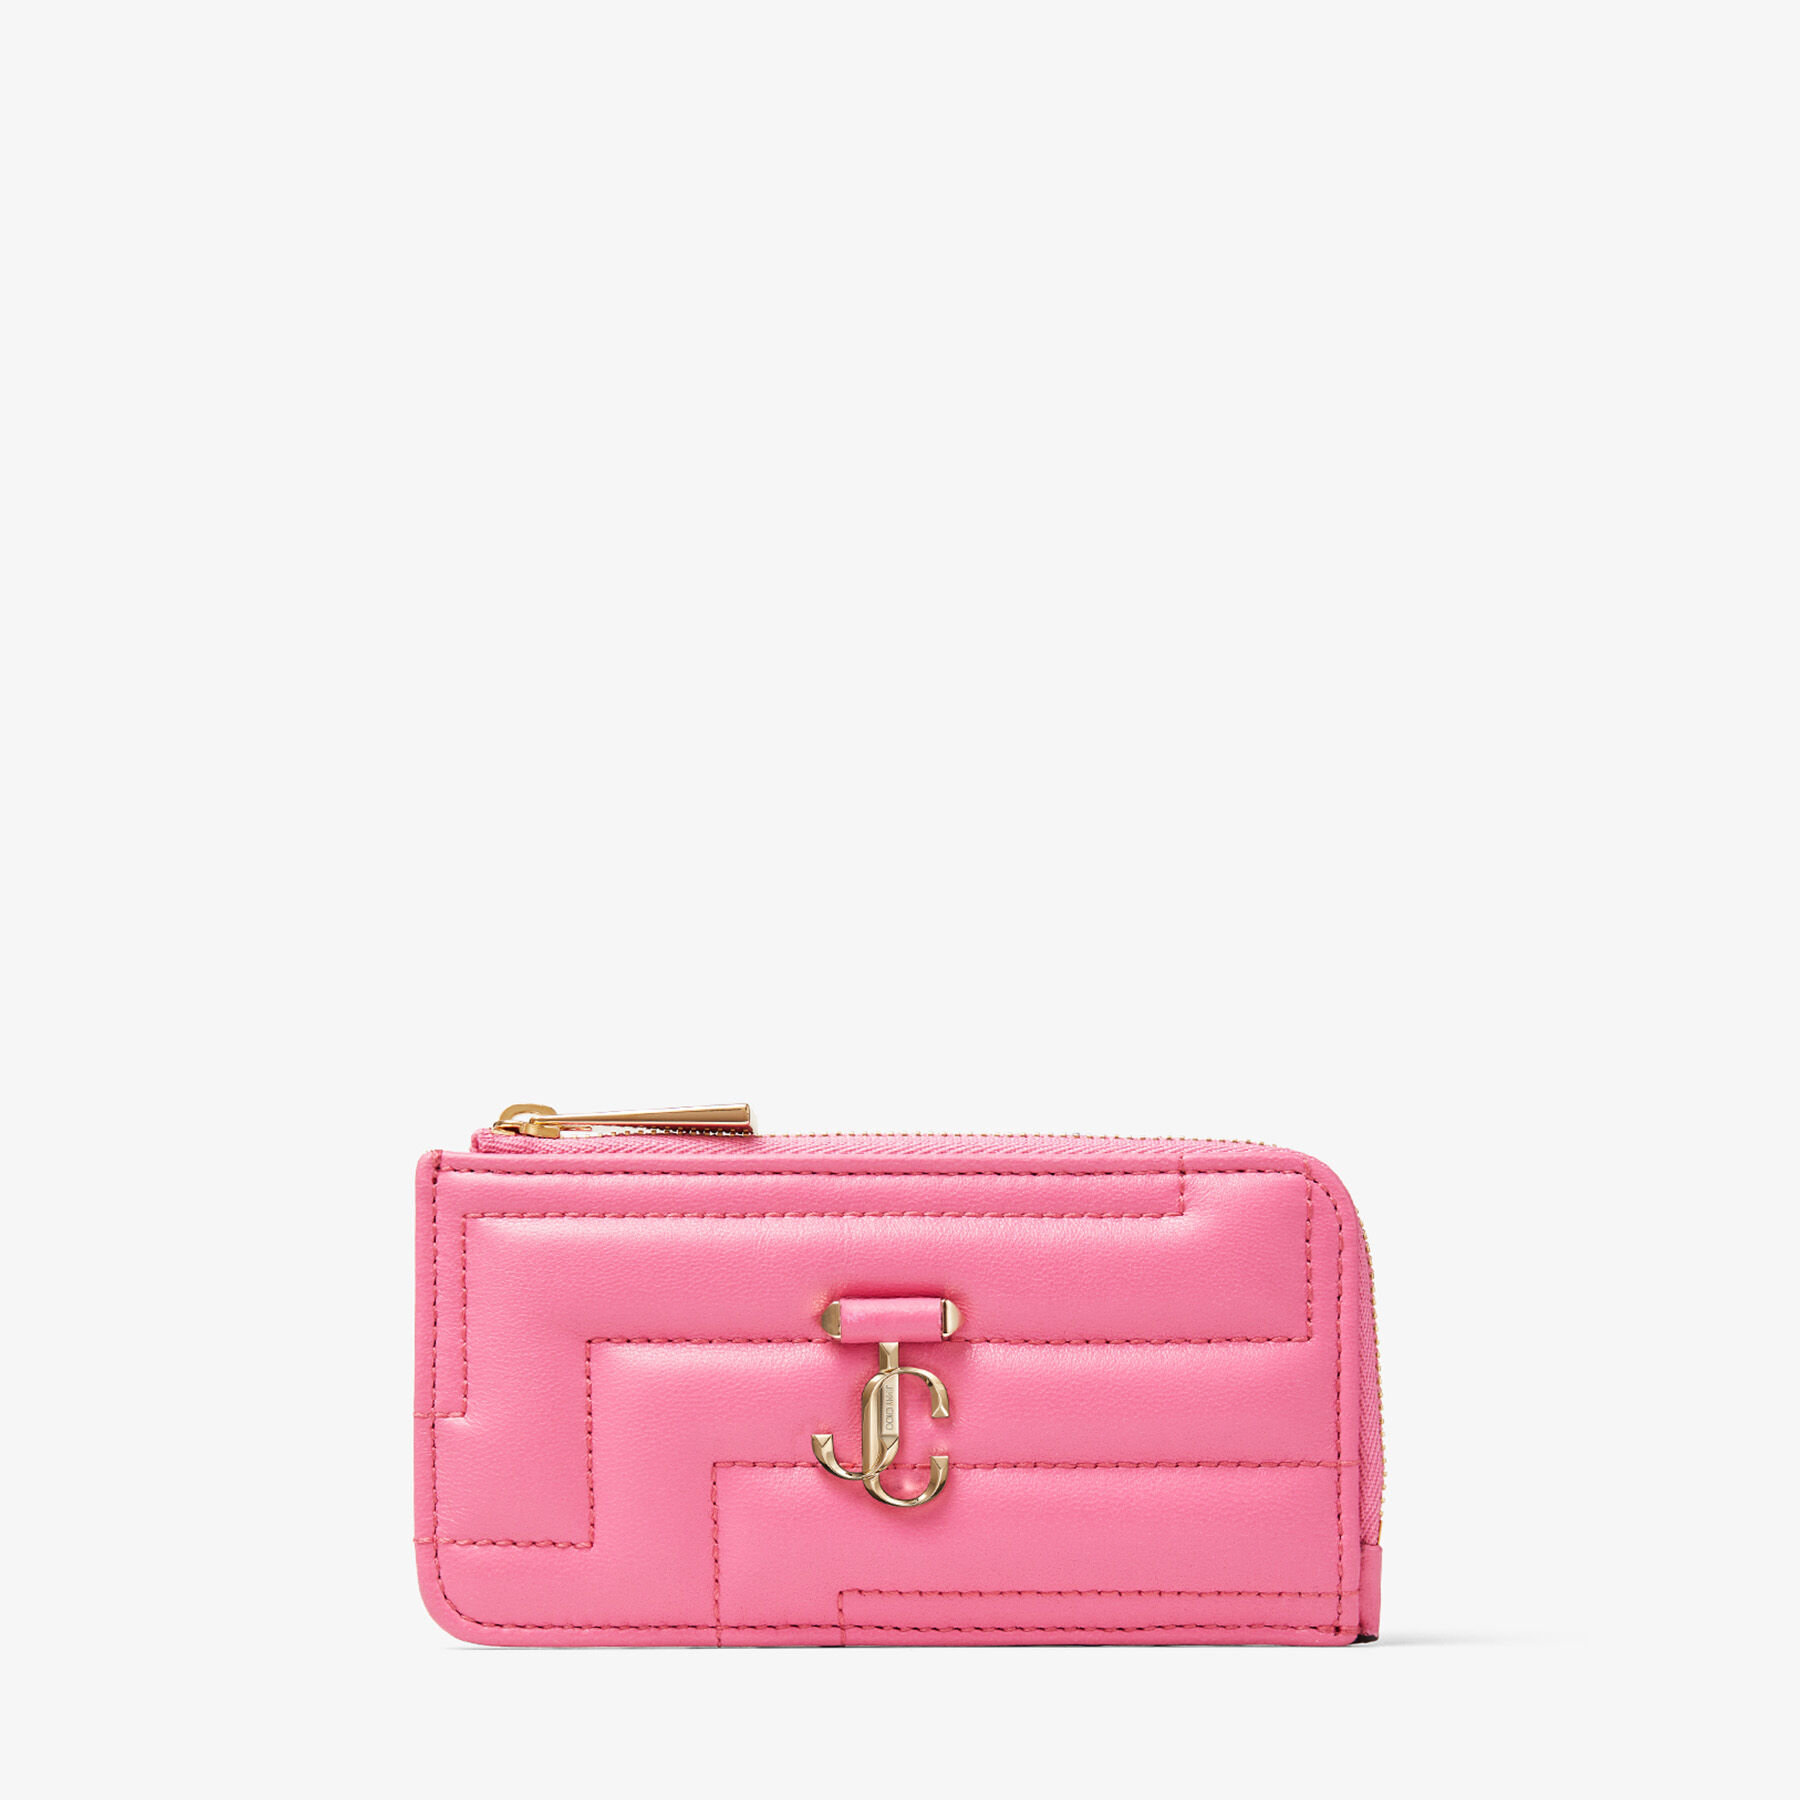 Candy Pink Quilted Nappa Leather Card Holder with JC Emblem | LISE